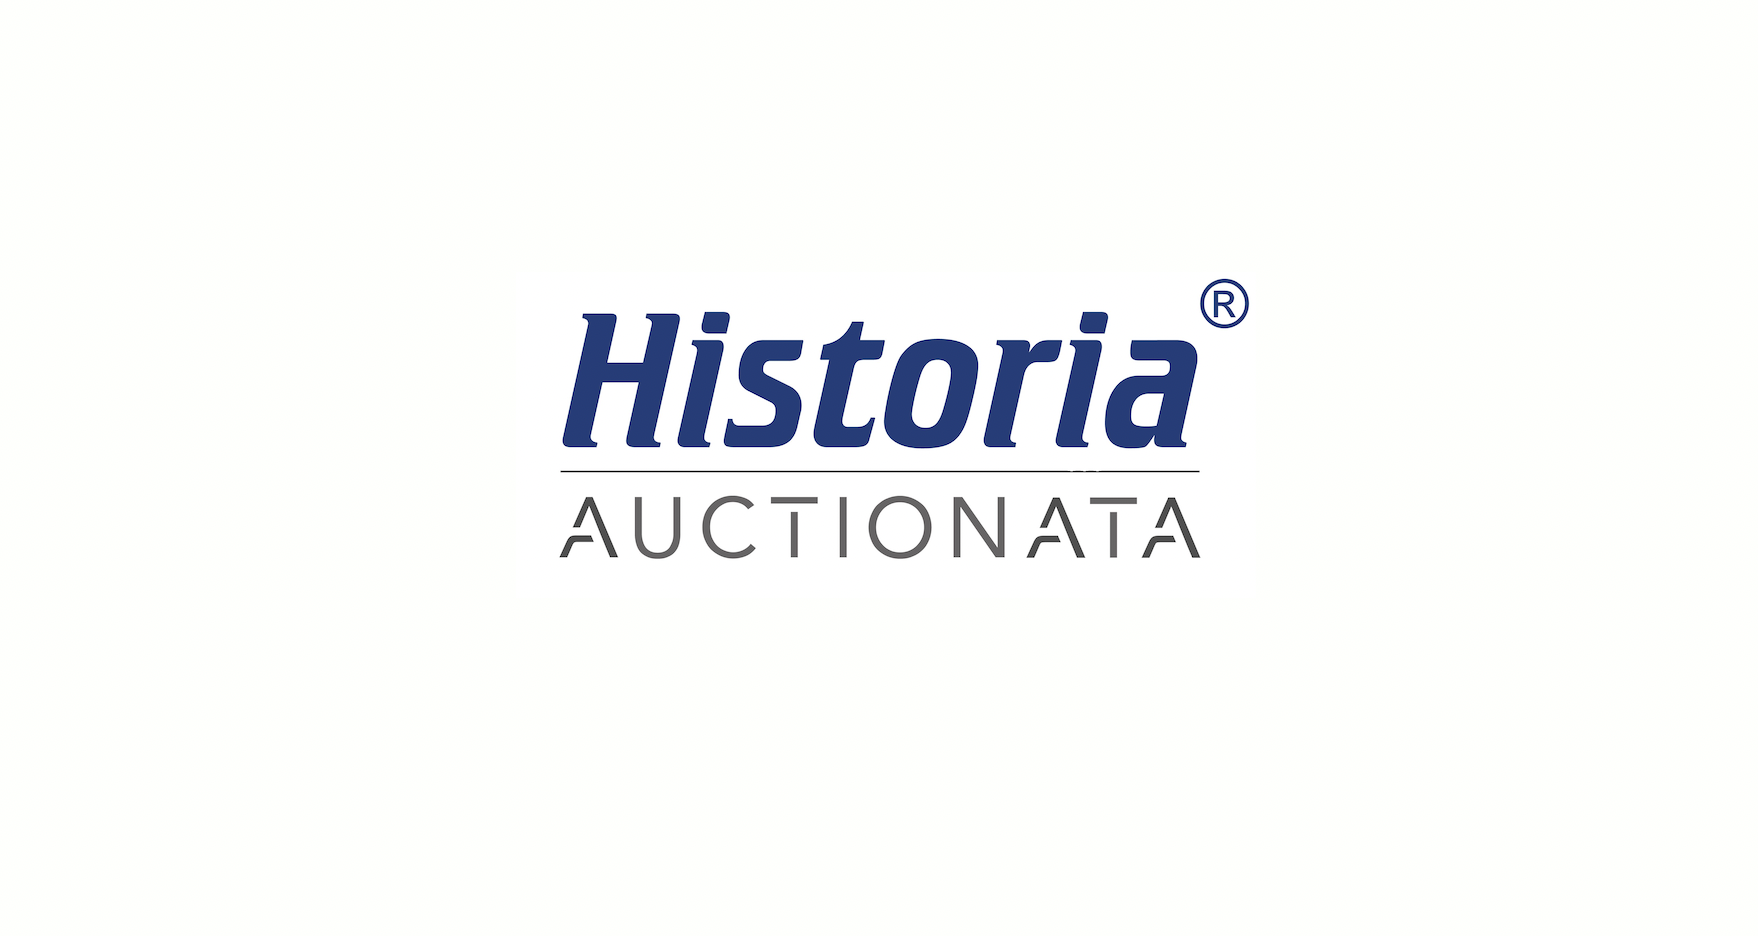 A new chapter begins with the acquisition of Auctionata